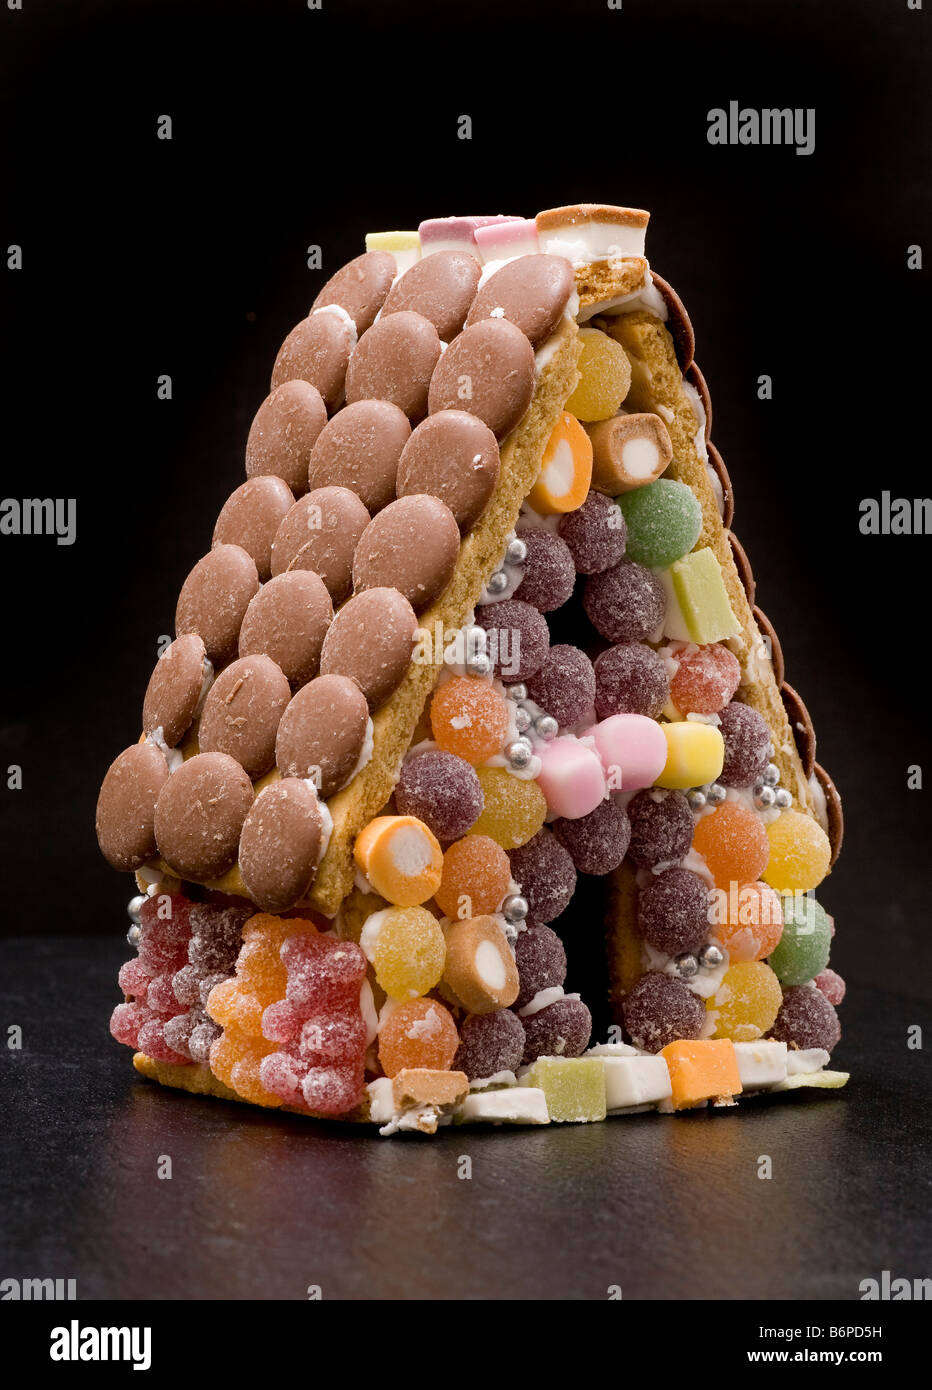 Gingerbread confectionary house with candy sweets tiled walls, chocolate button roof tiles. Stock Photo